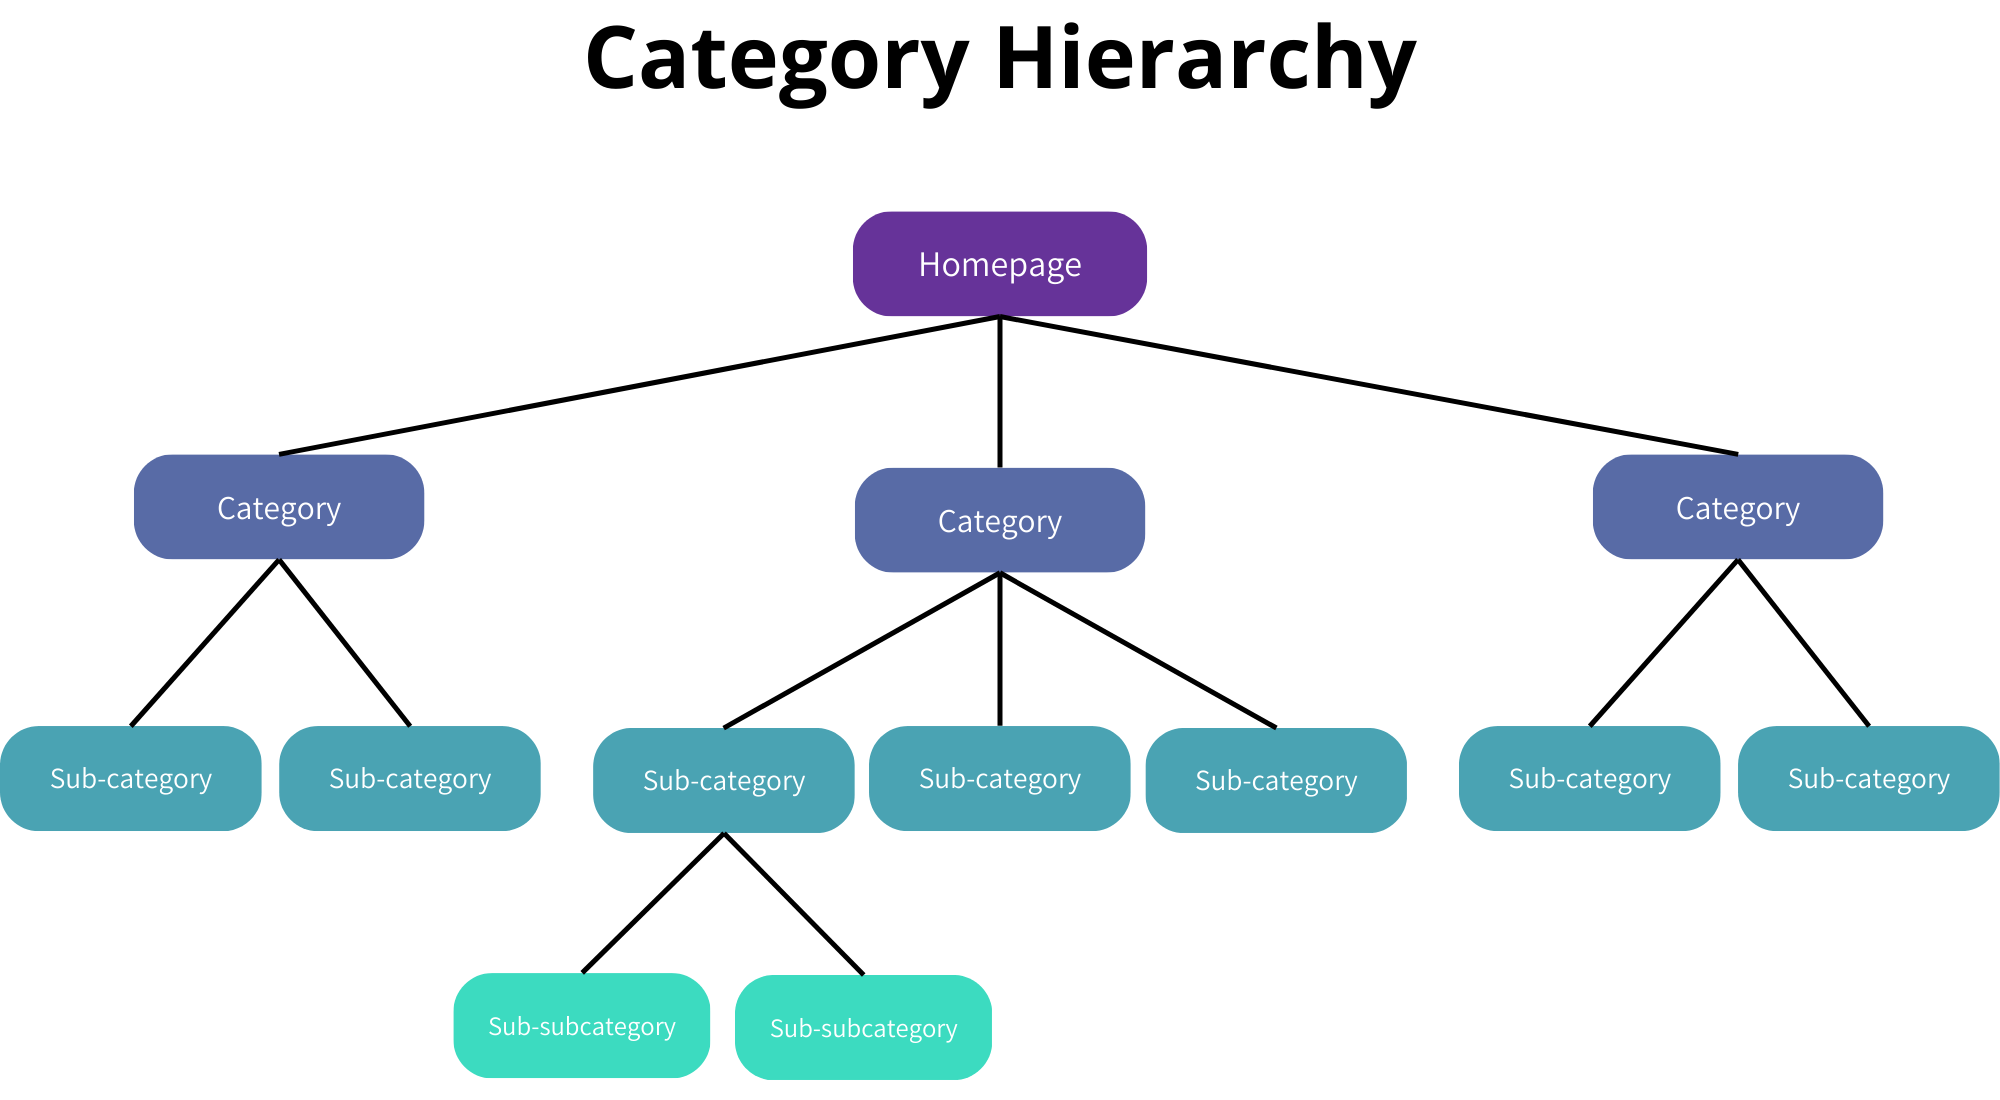 Example of a Category Hierarchy